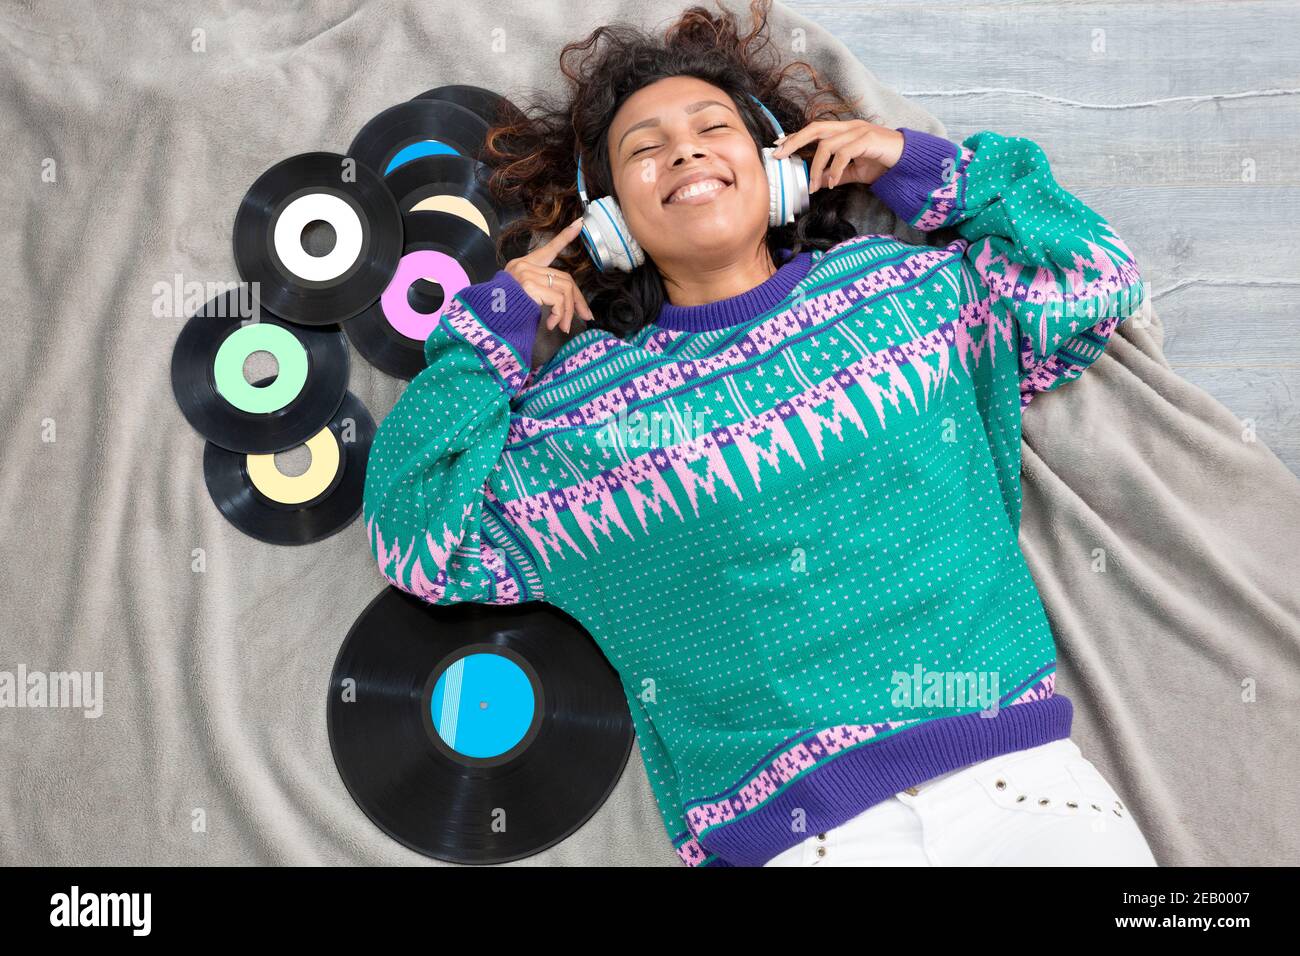 Top view of Latin girl lying on the floor listening to music with vinyl records around her. Stock Photo